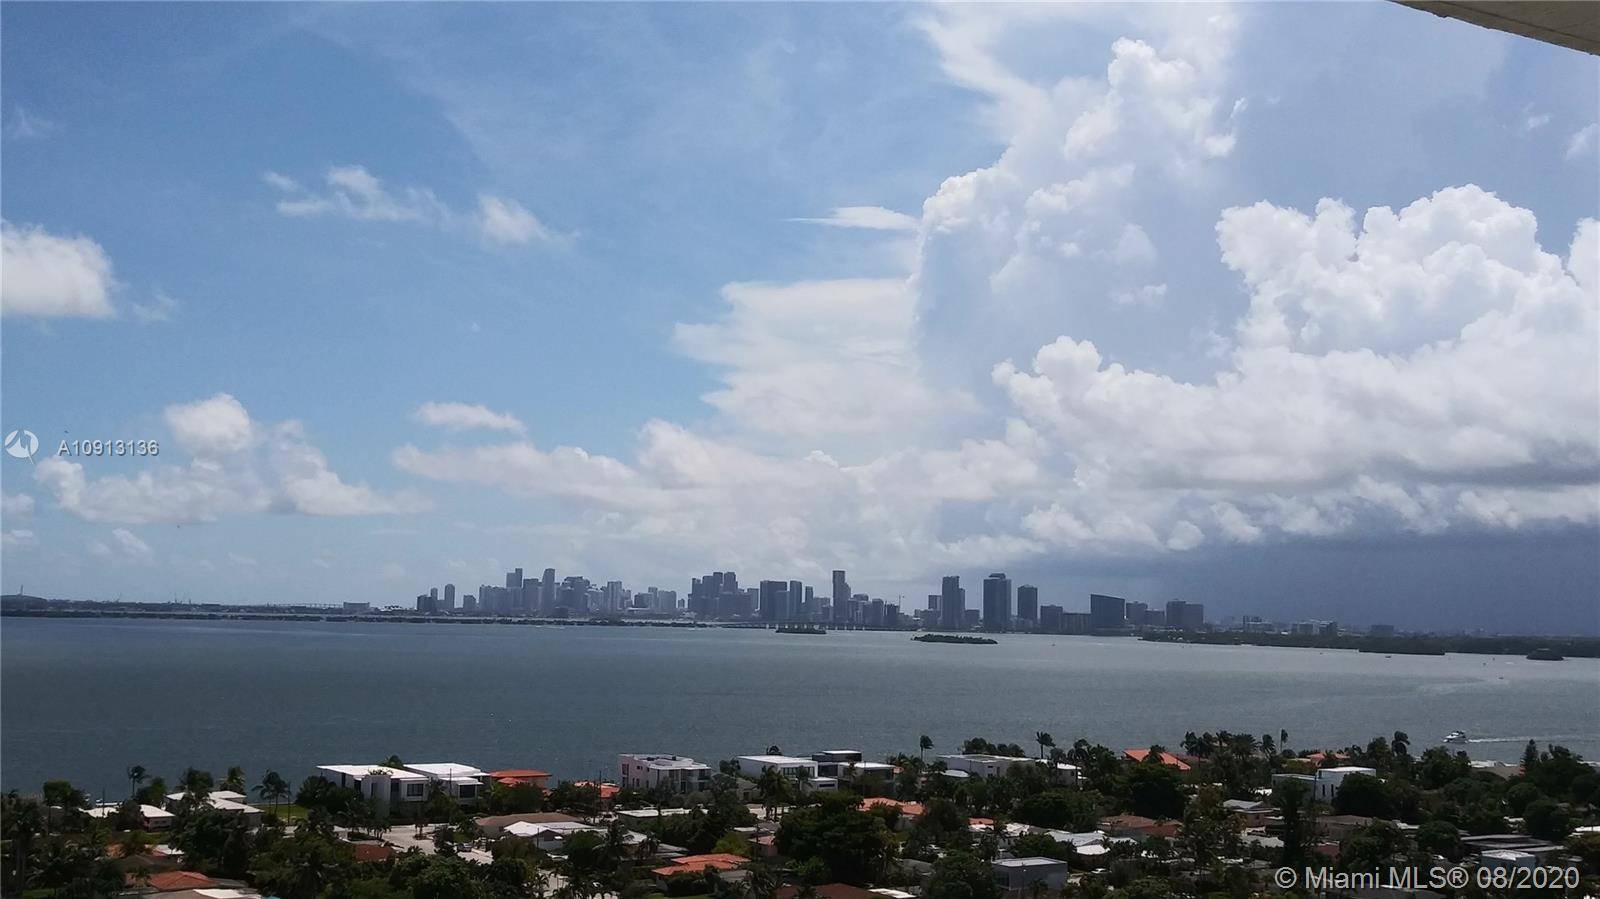 Furnished 2 Bedroom 2 Bath Den with breathtaking Ocean, Biscayne Bay and Downtown Miami Views at the Lexi Condominium in North Bay Village, Fl one of Miami's most desirable island ...